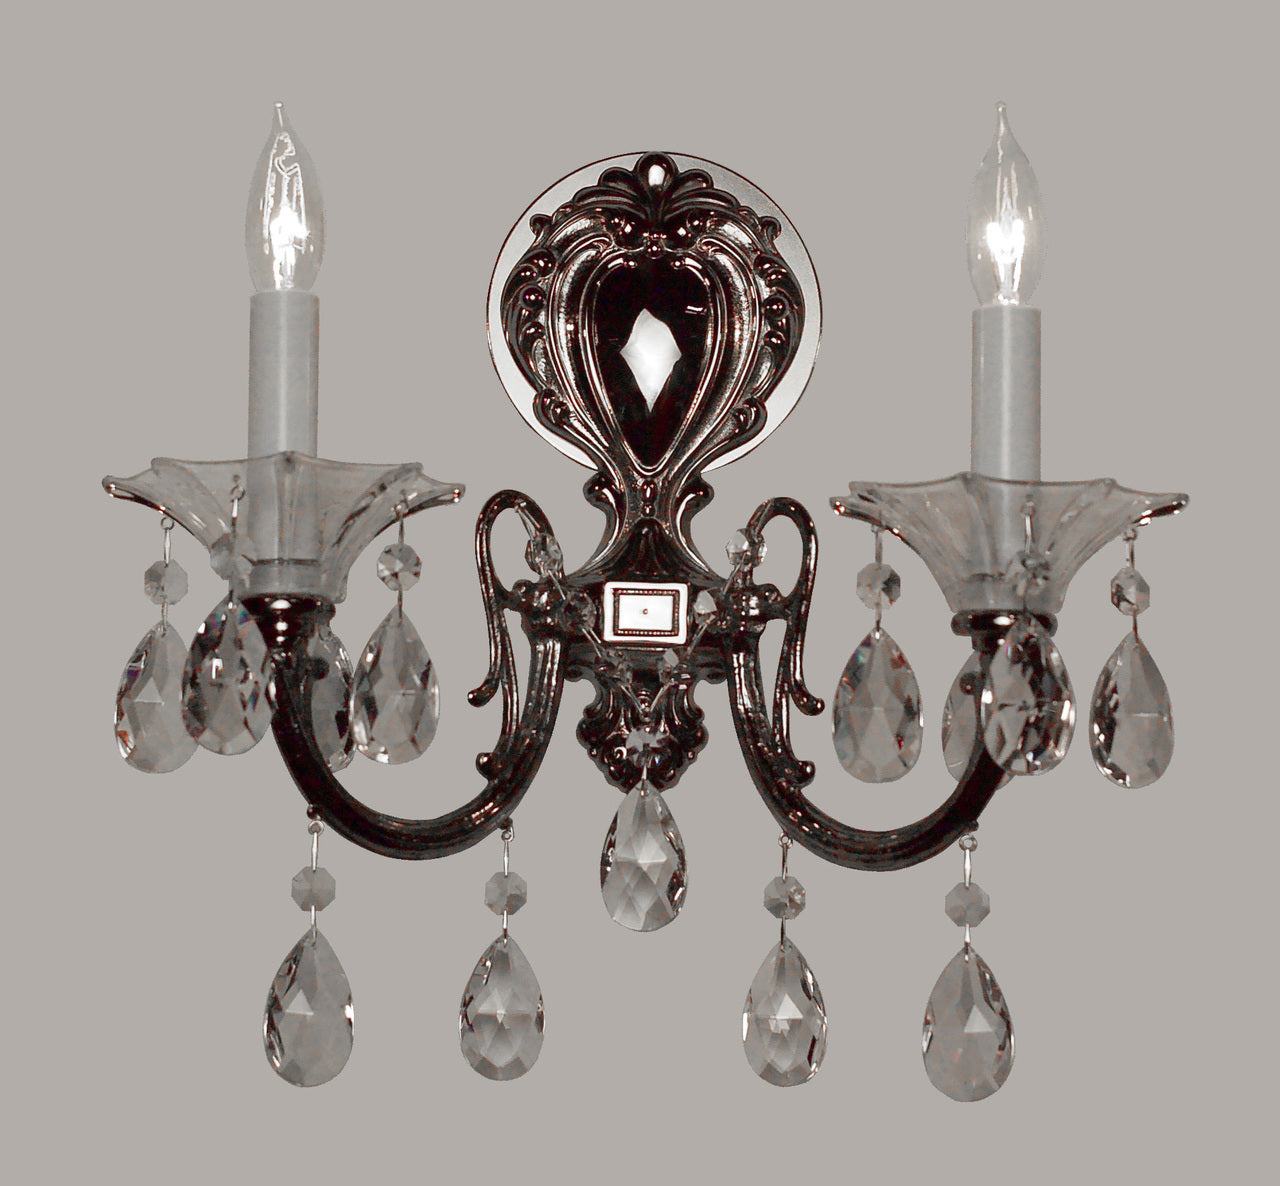 Classic Lighting 57052 CHP CGT Via Lombardi Crystal Wall Sconce in Champagne Pearl (Imported from Spain)